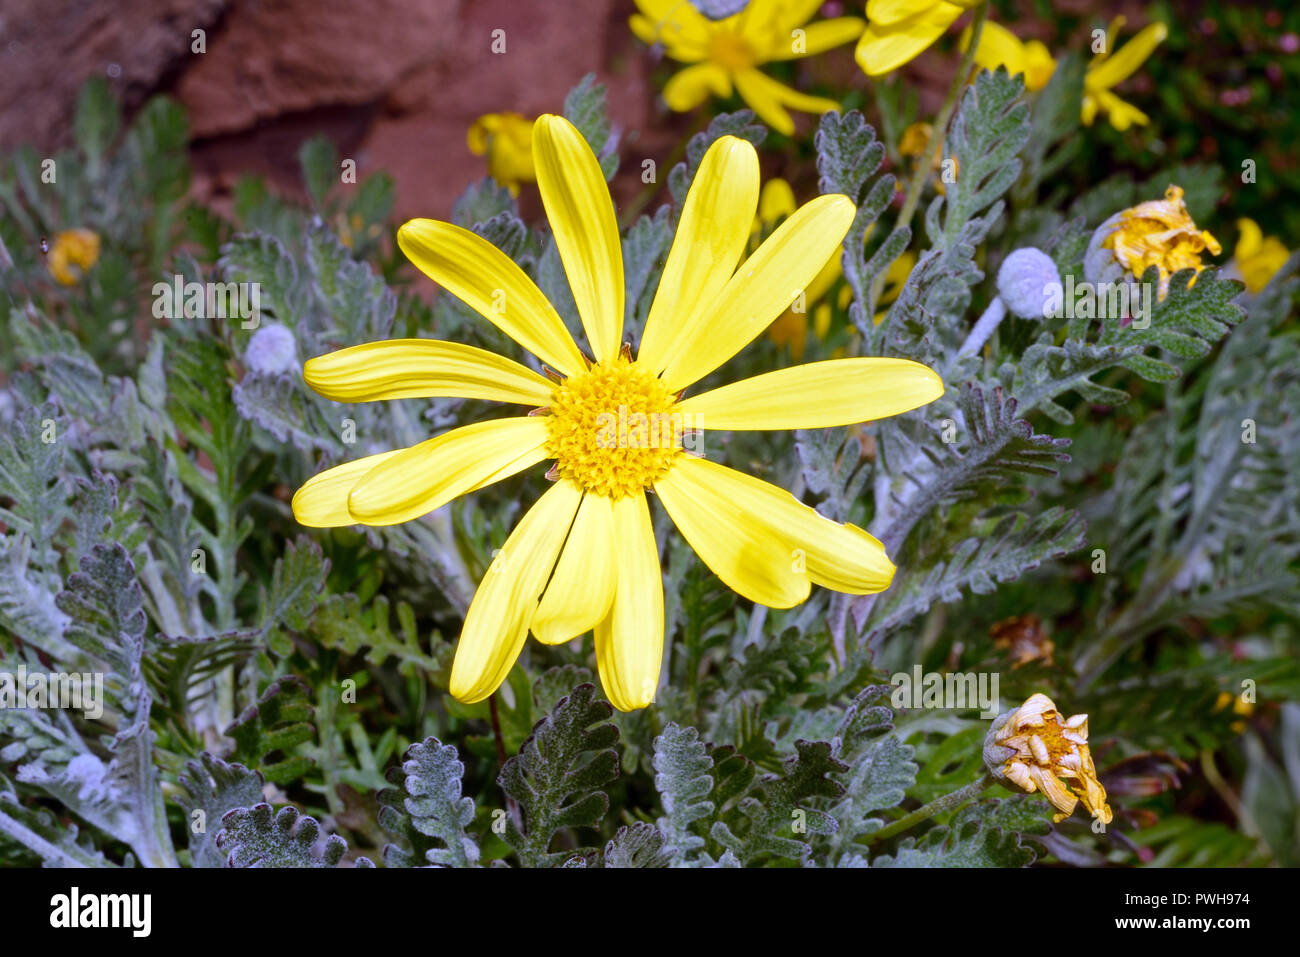 Euryops pectinatus (grey-leaved euryops) is endemic to sandstone slopes in the Western Cape (South Africa) but now widely used as a garden plant. Stock Photo